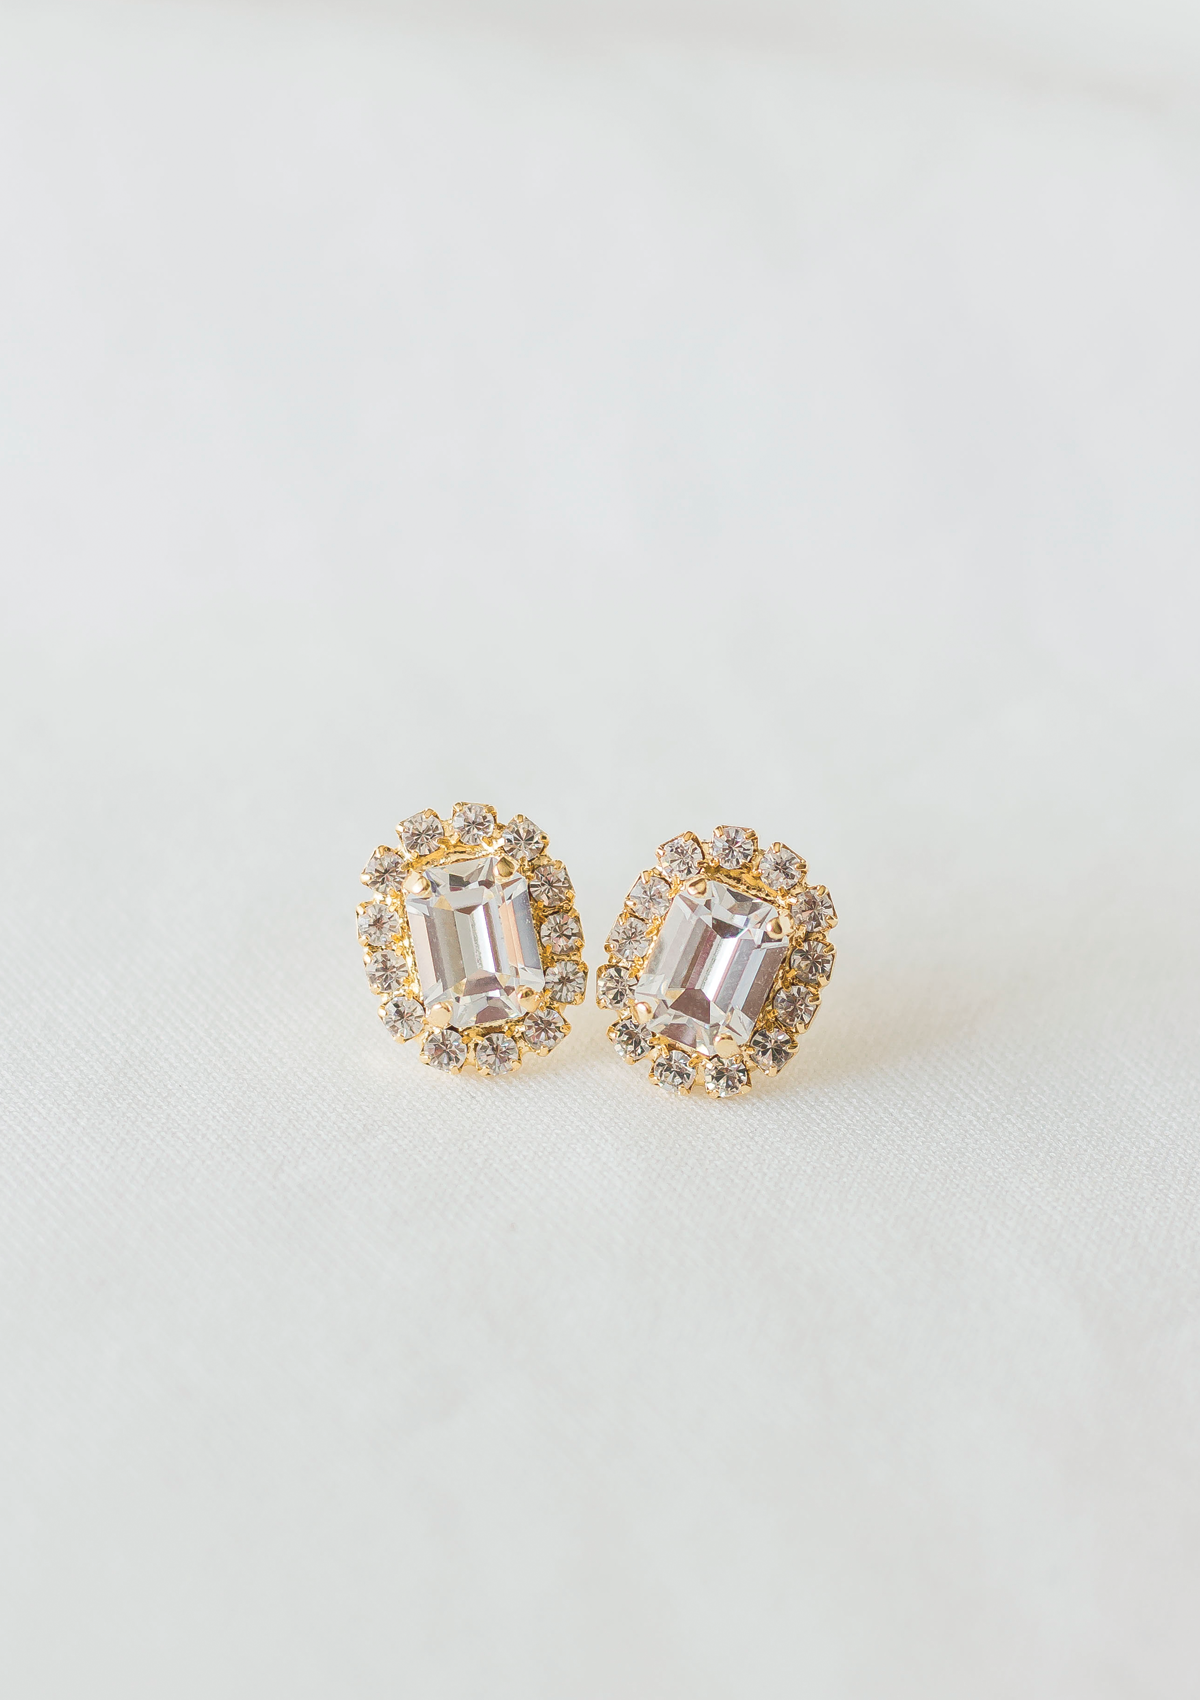 Cambridge Earrings, jewelry designed with Glamour, royalty and elegance in mind by Sarah Gauci in Malta. Crystal. 24K gold plated. 